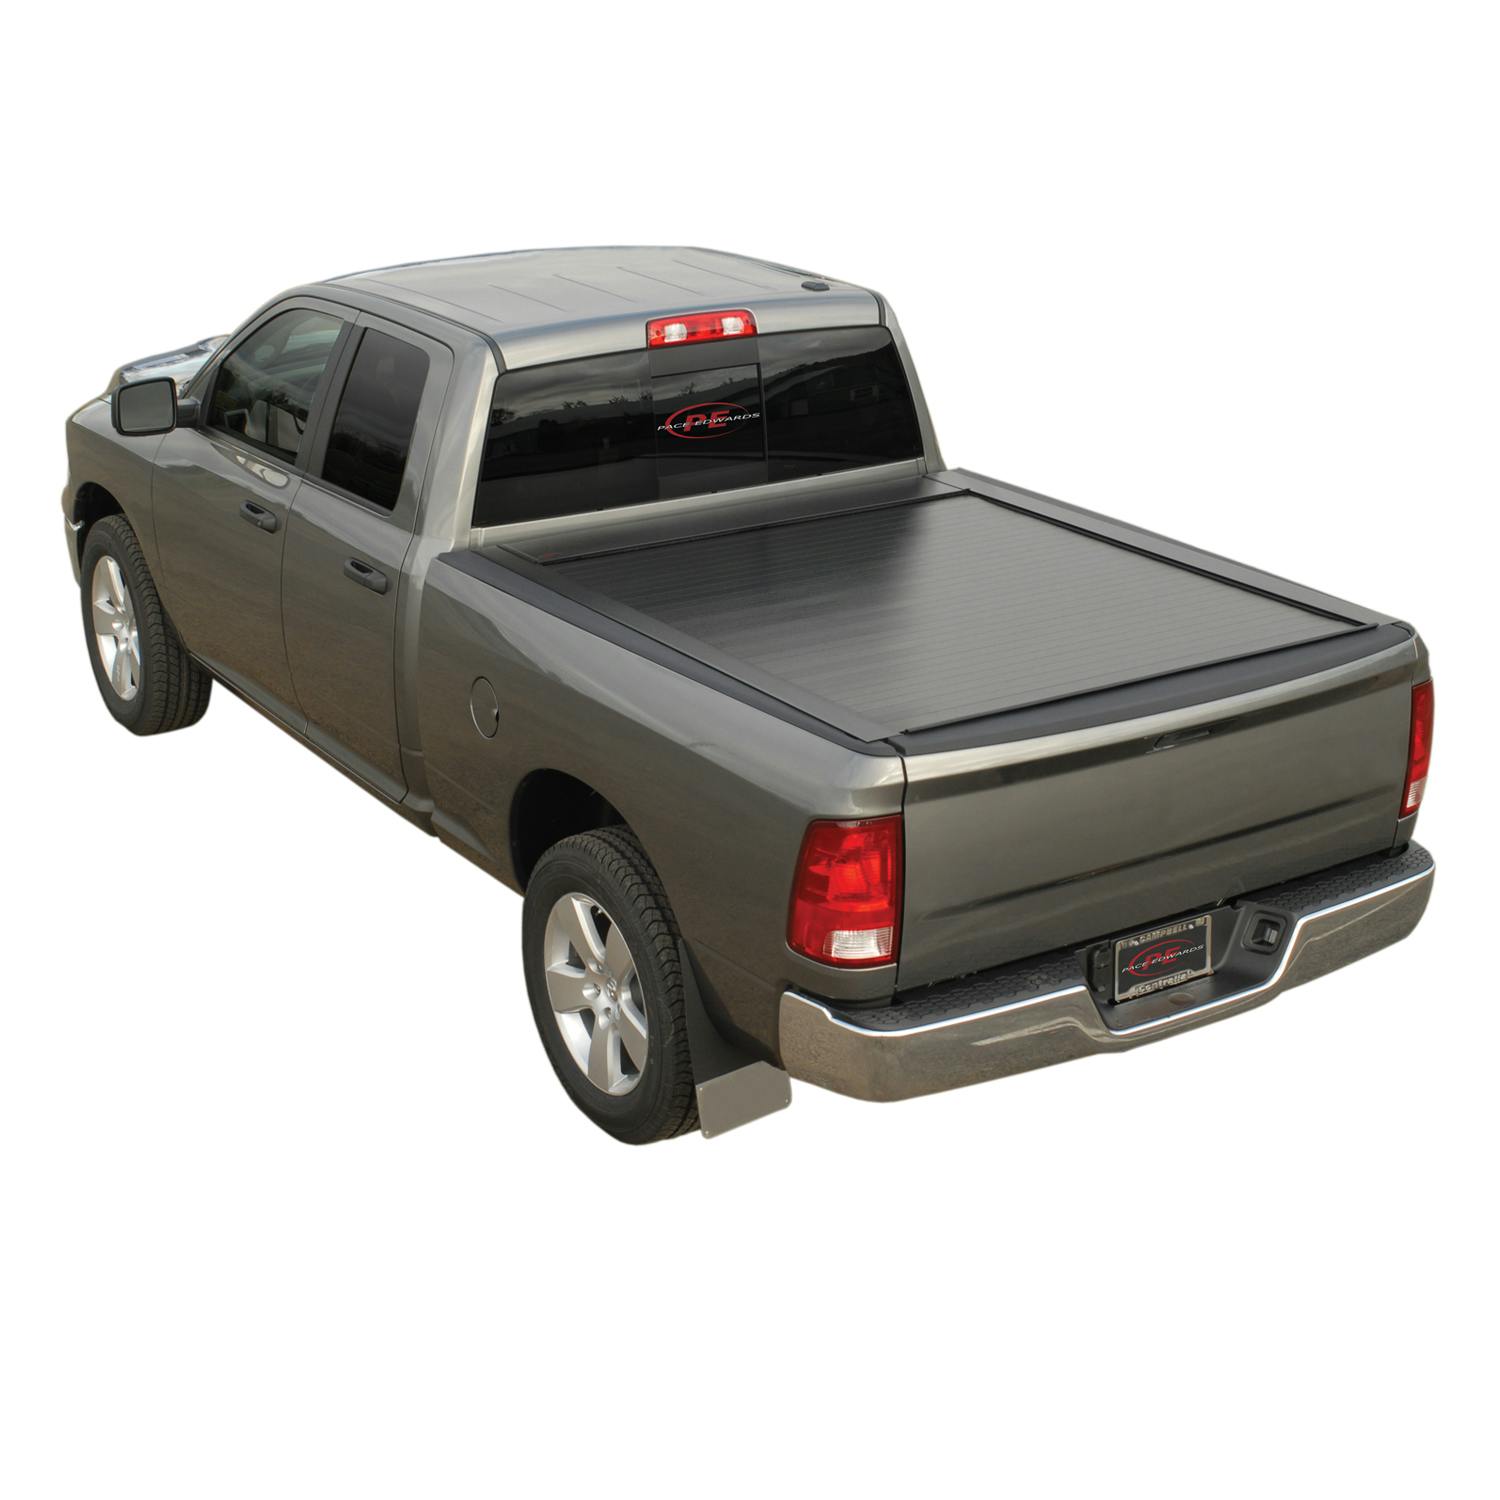 PACE EDWARDS Retractable Tonneau Covers | Truck'n America: Top